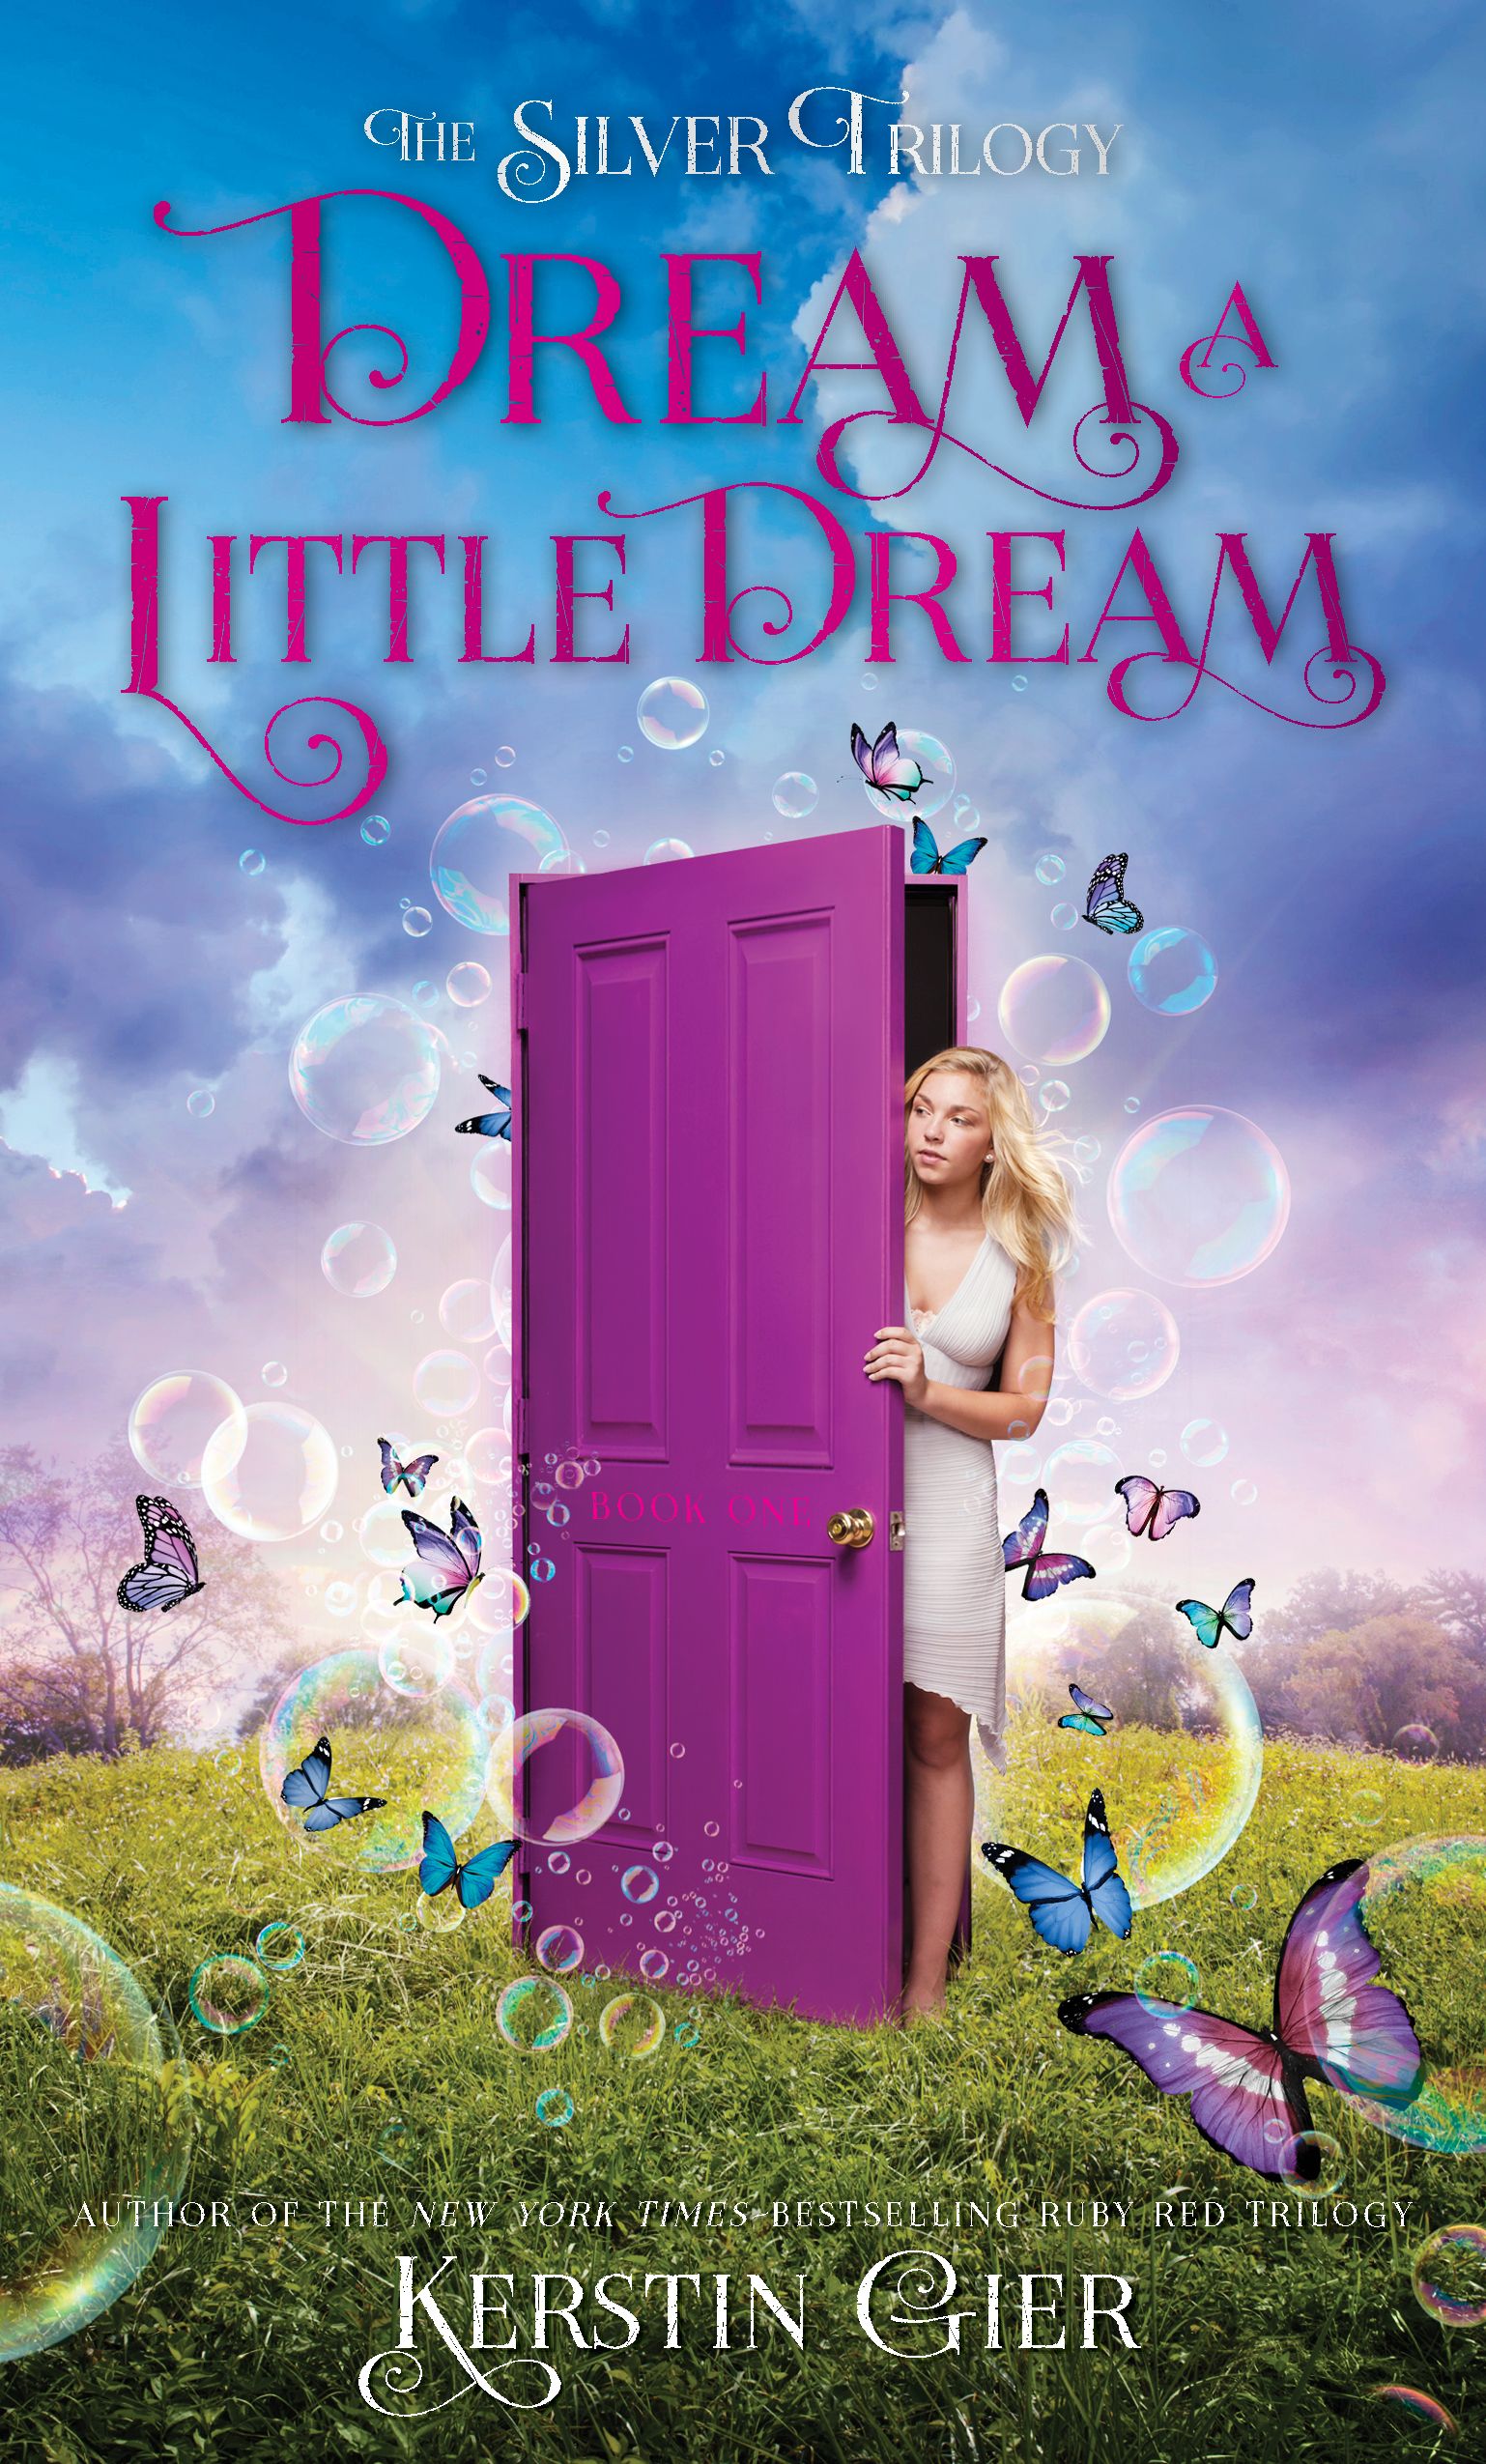 Dream a Little Dream by Kerstin Gier • January 6, 2015 • Henry Holt and